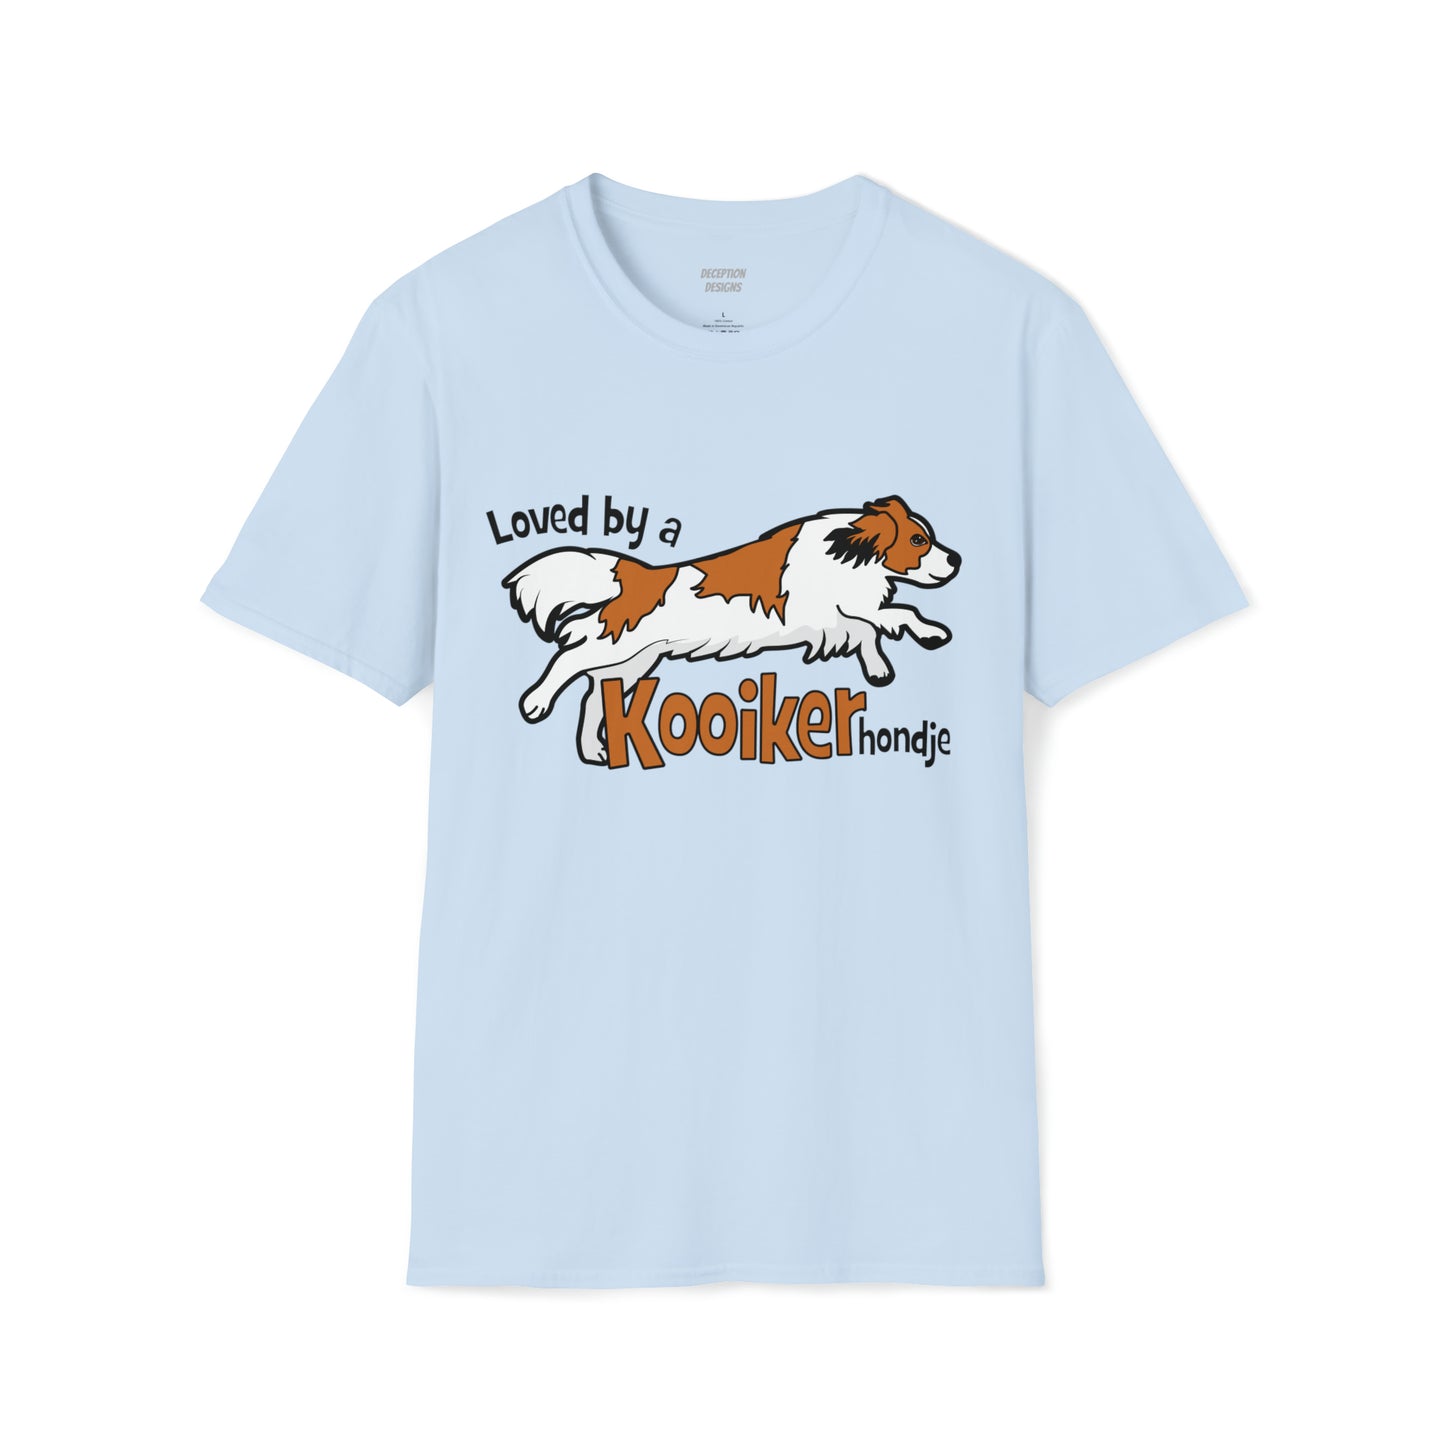 LOVED BY A KOOKER  Unisex Softstyle T-Shirt